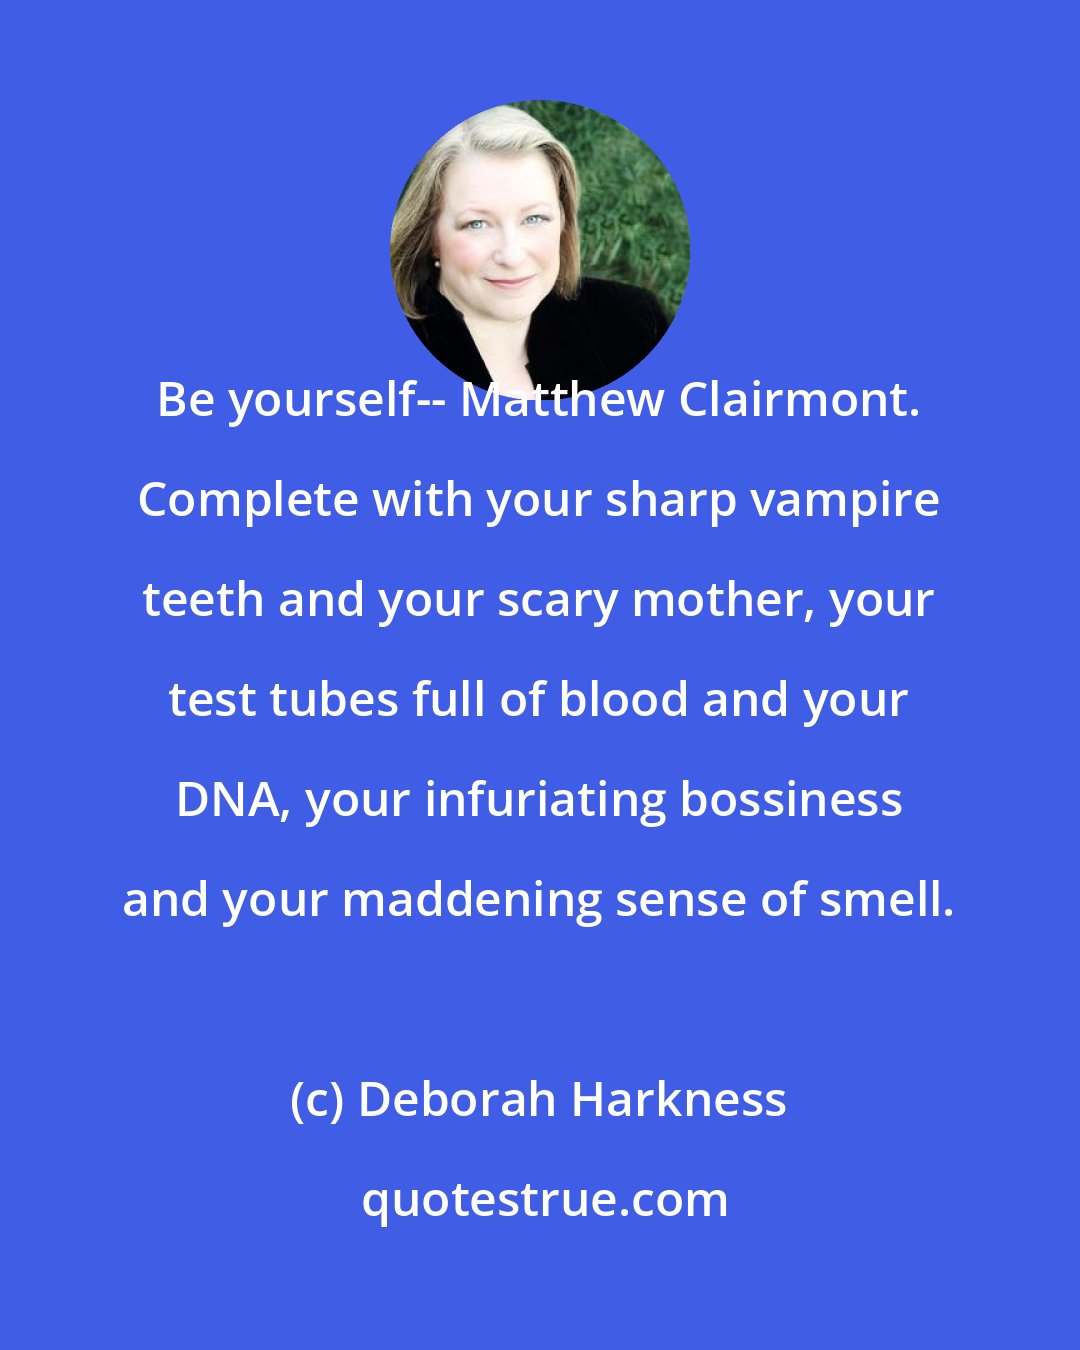 Deborah Harkness: Be yourself-- Matthew Clairmont. Complete with your sharp vampire teeth and your scary mother, your test tubes full of blood and your DNA, your infuriating bossiness and your maddening sense of smell.